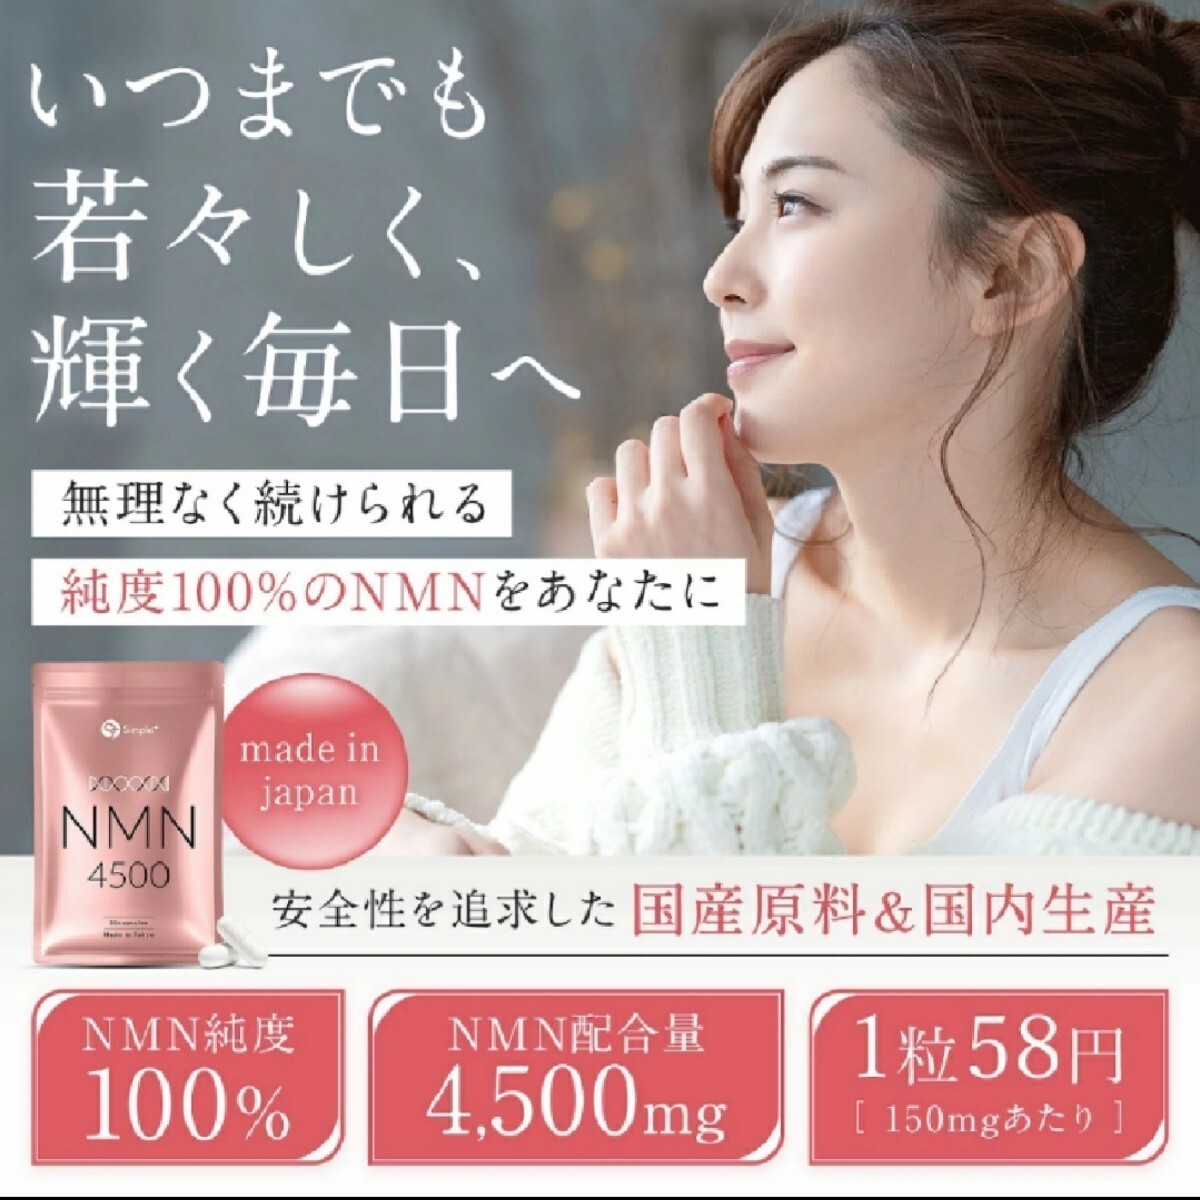 NMN supplement made in Japan purity 100% 4500mg supplement 30 day minute Capsule SIMPLE+ feedstocks domestic production high quality aging care skin care 2 sack set 